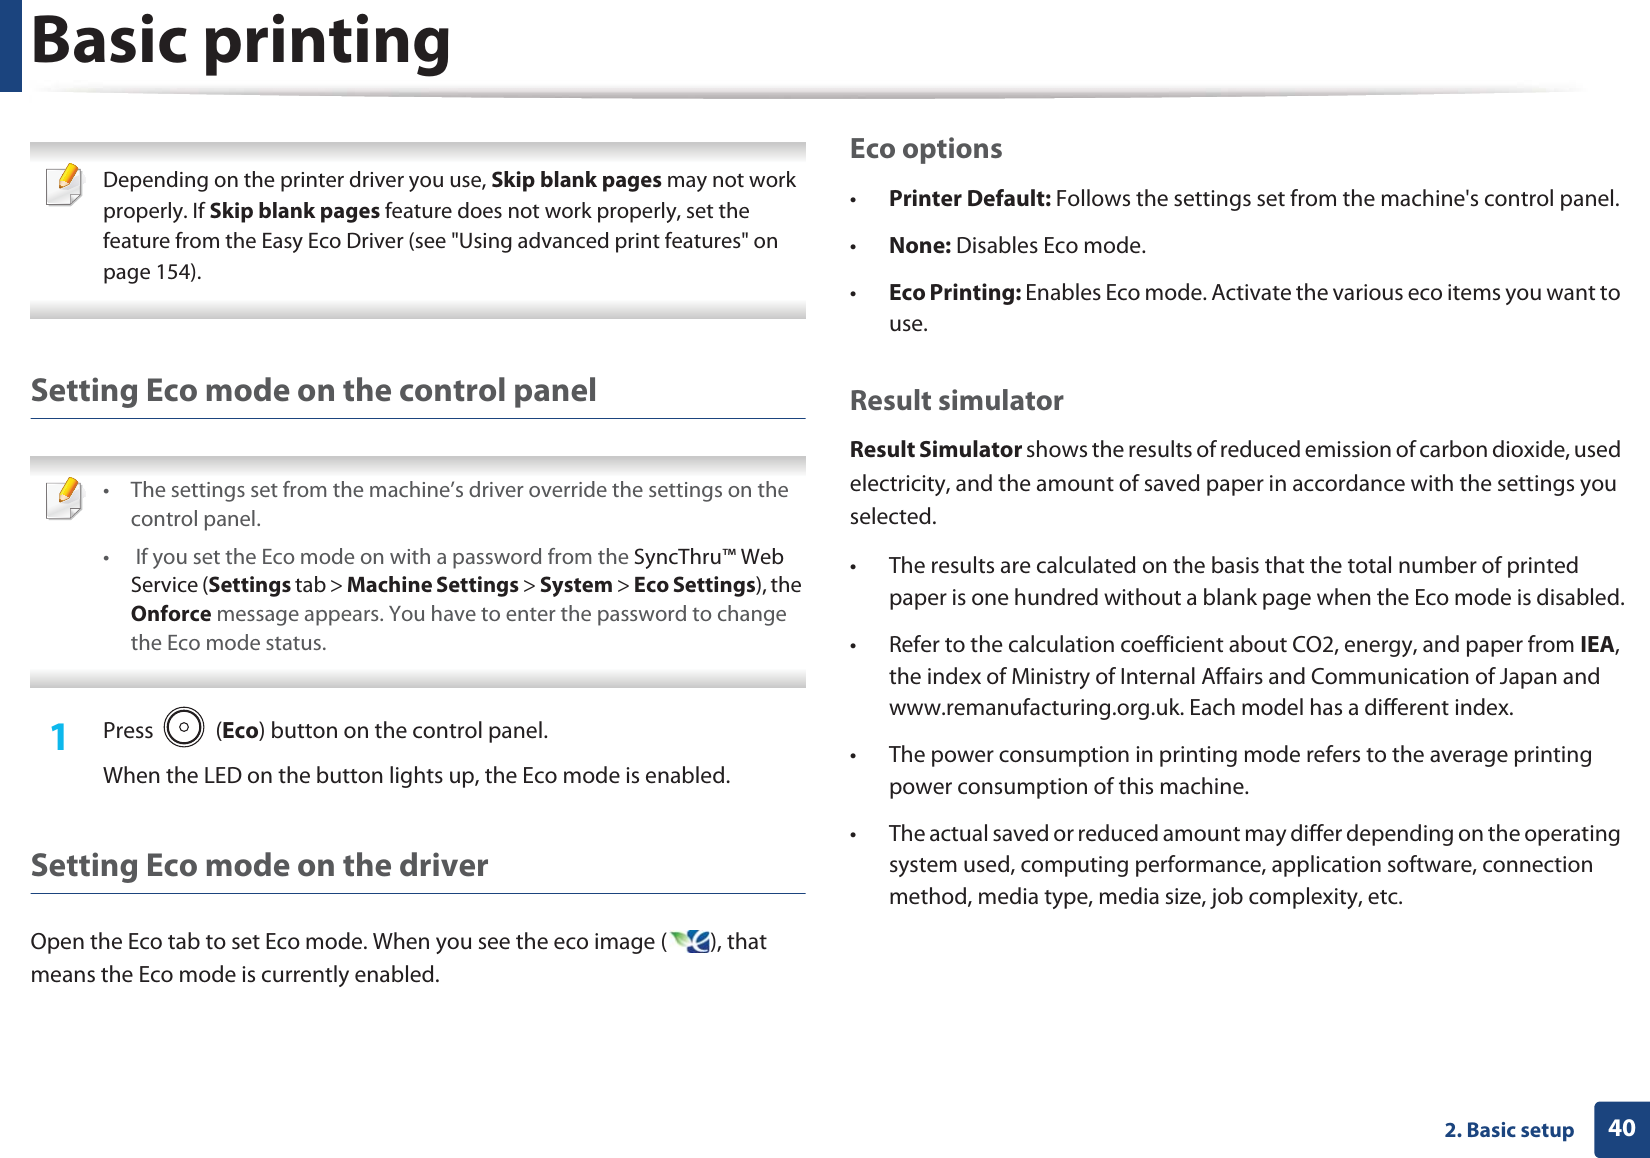 Basic printing402. Basic setup Depending on the printer driver you use, Skip blank pages may not work properly. If Skip blank pages feature does not work properly, set the feature from the Easy Eco Driver (see &quot;Using advanced print features&quot; on page 154). Setting Eco mode on the control panel • The settings set from the machine’s driver override the settings on the control panel.•  If you set the Eco mode on with a password from the SyncThru™ Web Service (Settings tab &gt; Machine Settings &gt; System &gt; Eco Settings), the Onforce message appears. You have to enter the password to change the Eco mode status. 1Press  (Eco) button on the control panel. When the LED on the button lights up, the Eco mode is enabled.Setting Eco mode on the driverOpen the Eco tab to set Eco mode. When you see the eco image ( ), that means the Eco mode is currently enabled.Eco options•Printer Default: Follows the settings set from the machine&apos;s control panel. •None: Disables Eco mode.•Eco Printing: Enables Eco mode. Activate the various eco items you want to use.Result simulatorResult Simulator shows the results of reduced emission of carbon dioxide, used electricity, and the amount of saved paper in accordance with the settings you selected.• The results are calculated on the basis that the total number of printed paper is one hundred without a blank page when the Eco mode is disabled.• Refer to the calculation coefficient about CO2, energy, and paper from IEA, the index of Ministry of Internal Affairs and Communication of Japan and www.remanufacturing.org.uk. Each model has a different index. • The power consumption in printing mode refers to the average printing power consumption of this machine. • The actual saved or reduced amount may differ depending on the operating system used, computing performance, application software, connection method, media type, media size, job complexity, etc.